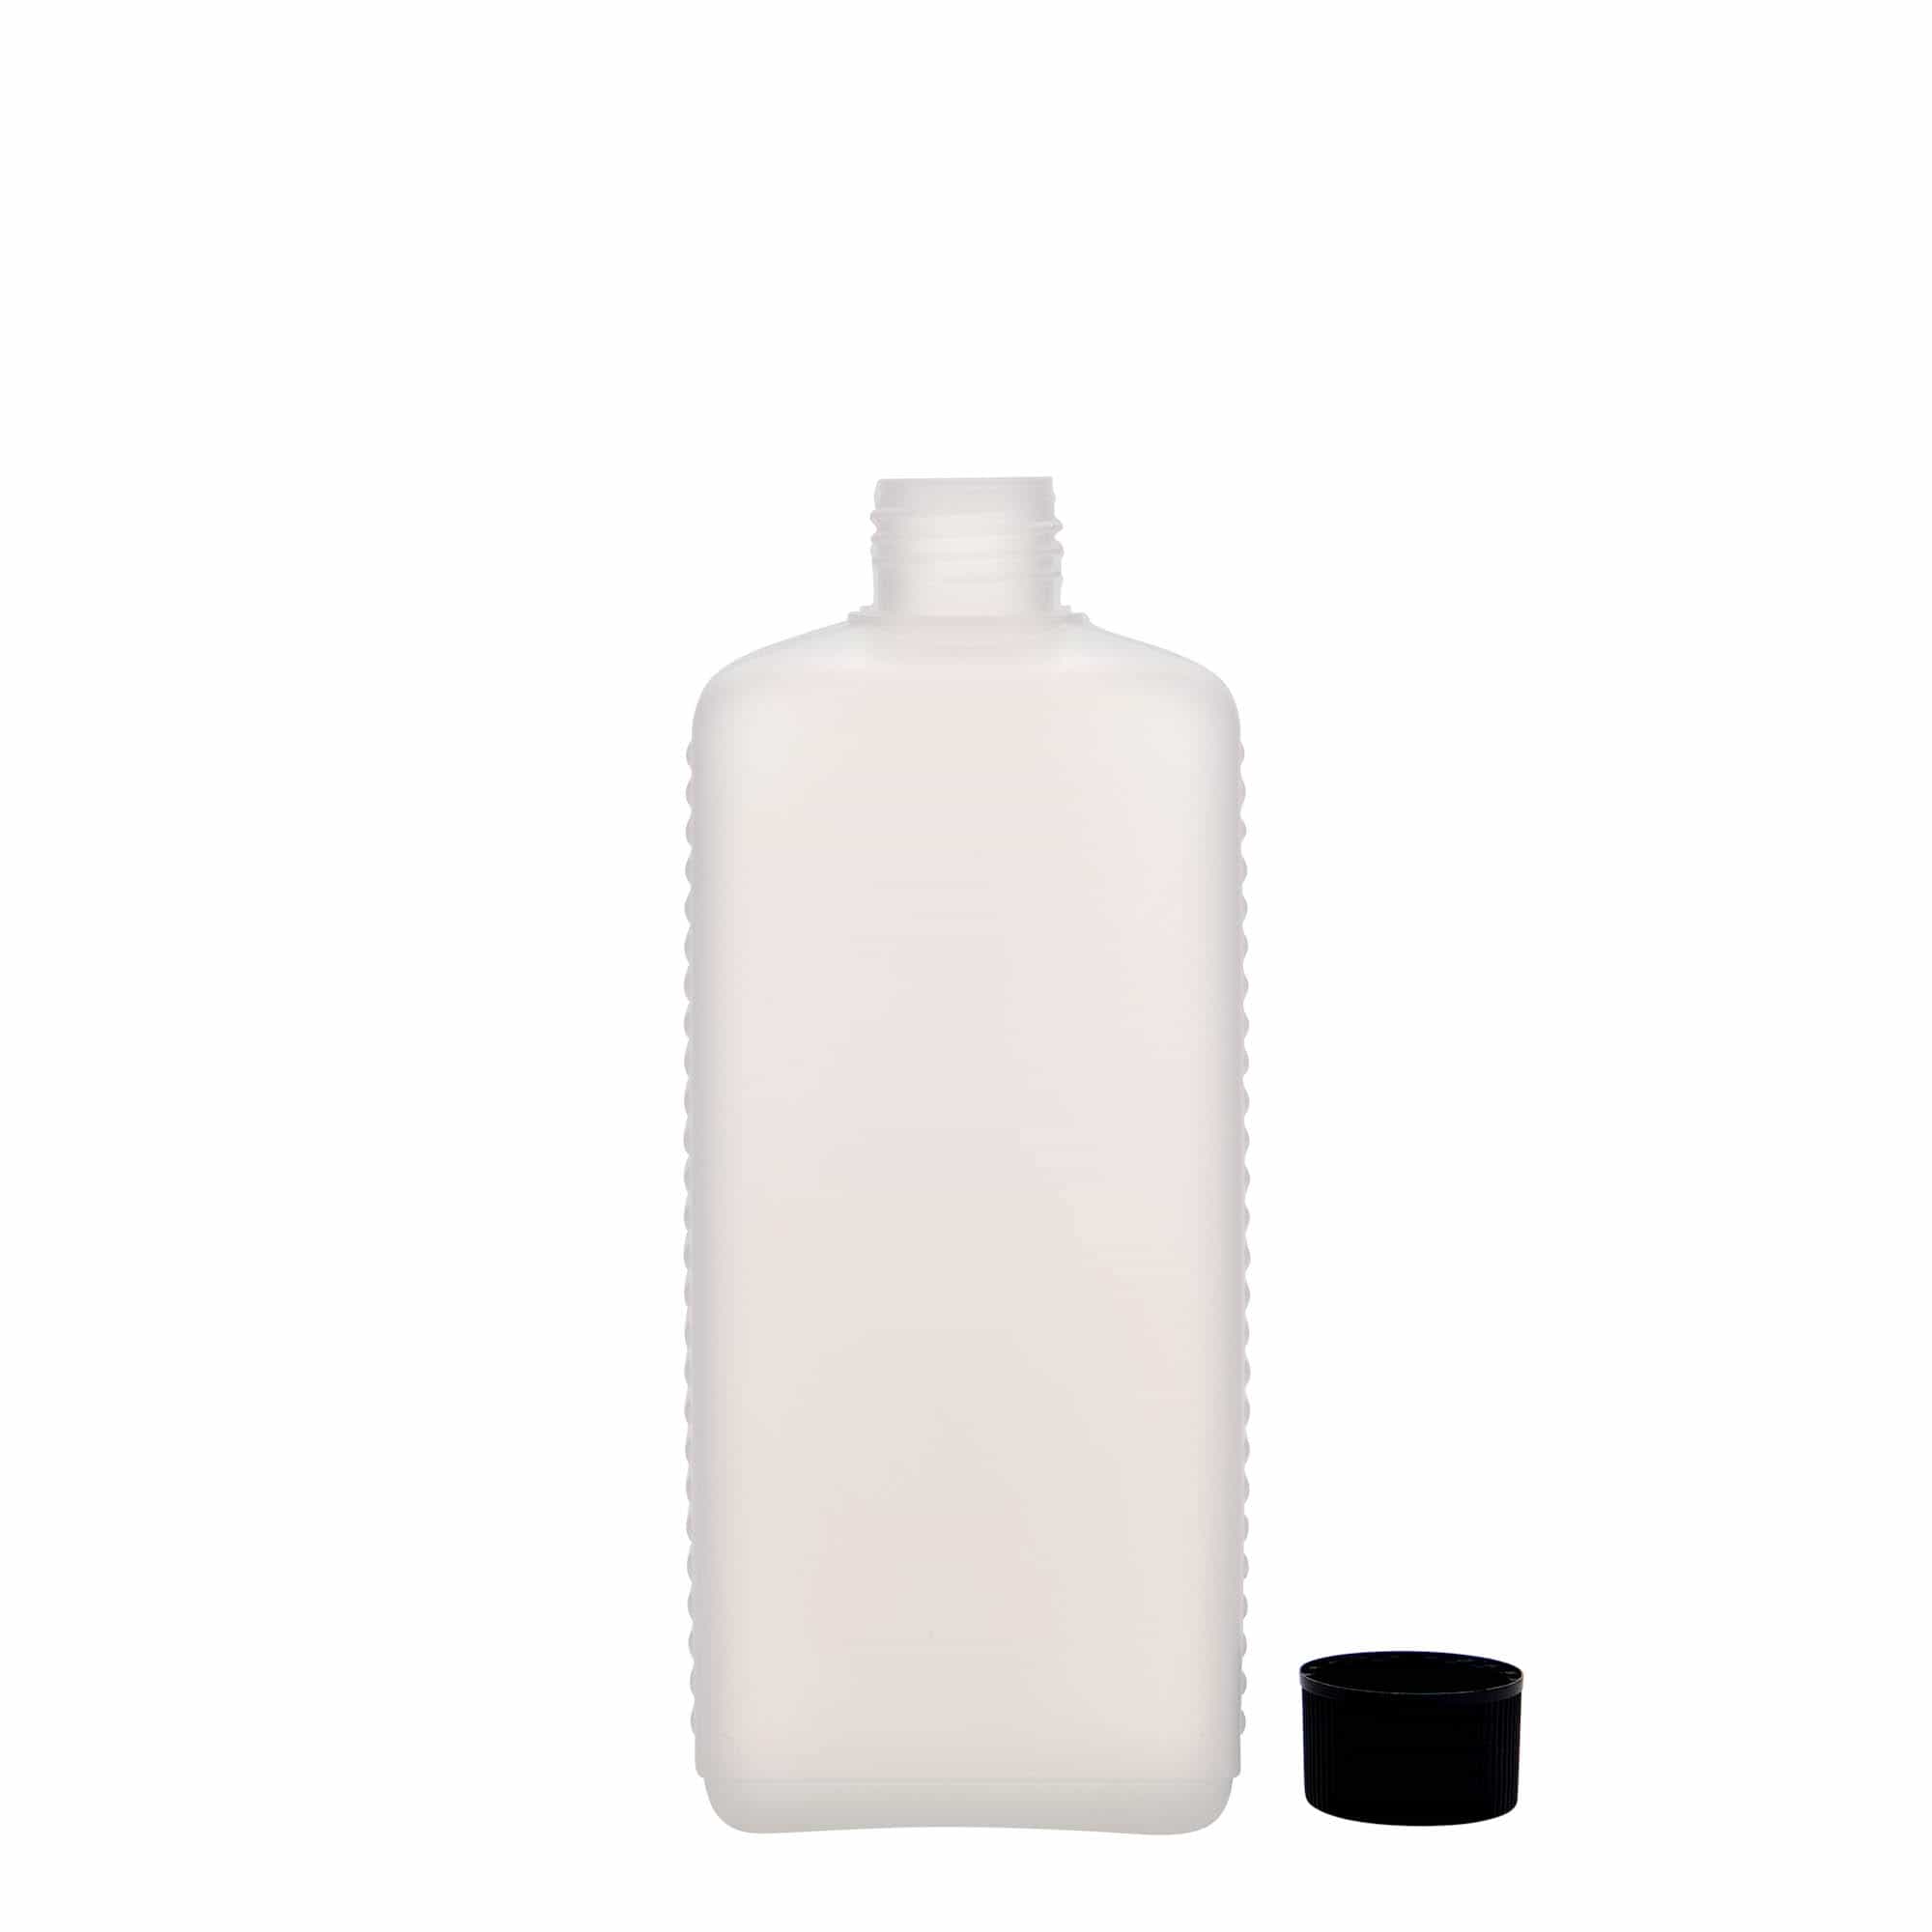 500 ml canister bottle, rectangular, HDPE plastic, natural, closure: DIN 25 EPE